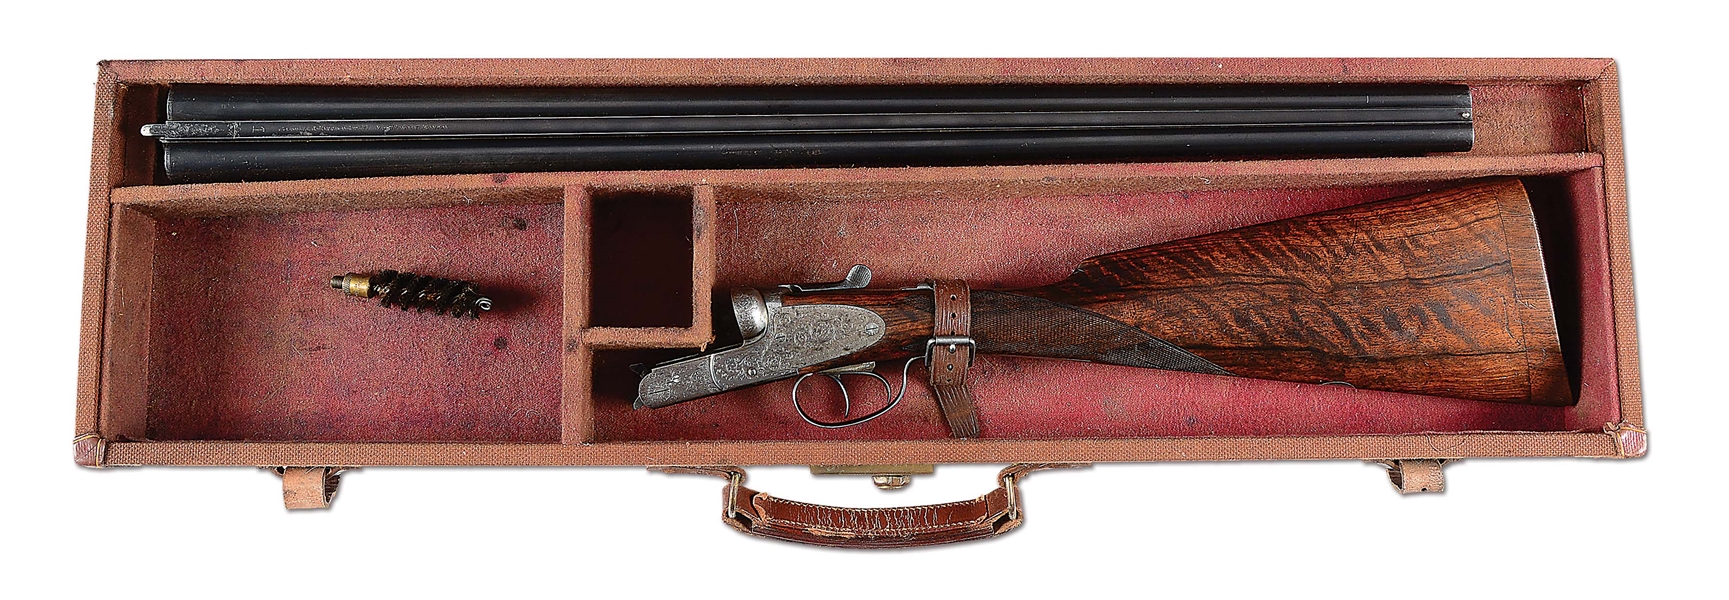 (C) 16 GAUGE COGSWELL & HARRISON "AVANT TOUT" SIDEPLATED BOXLOCK EJECTOR GAME GUN WITH CASE.